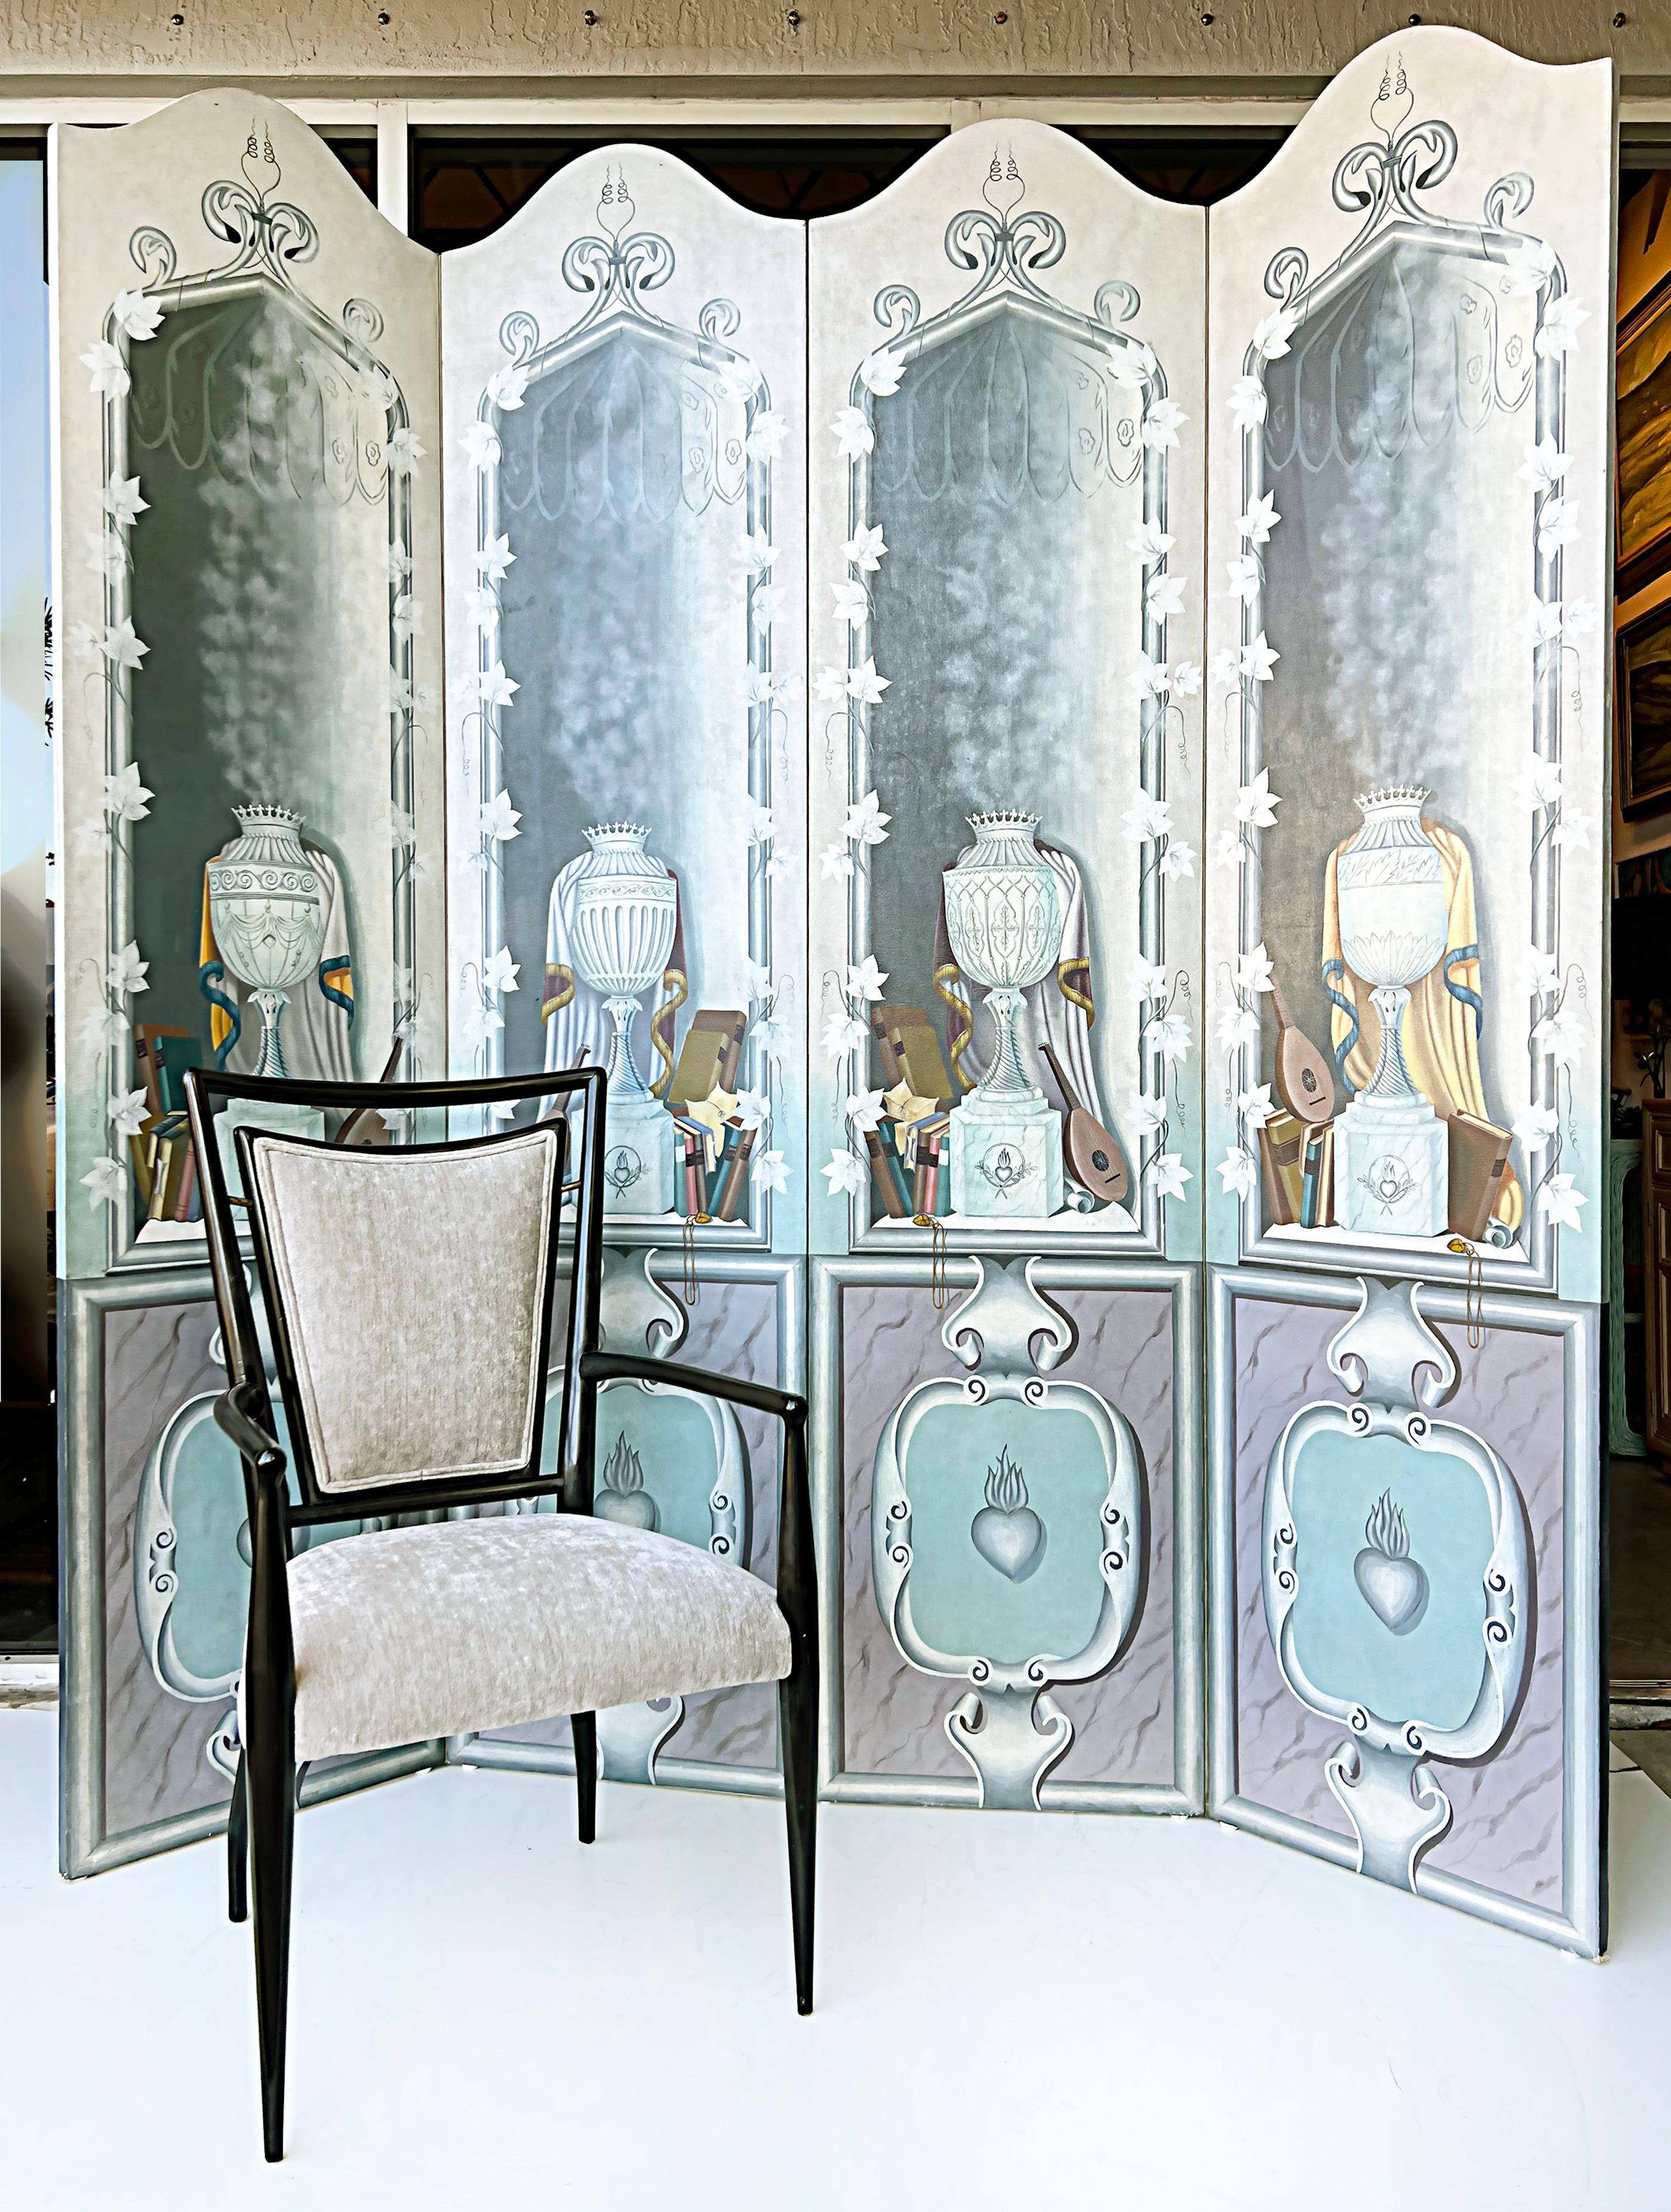 Vintage Maitland Smith Hand Painted Screen In Neoclassical Style, 4 Panels

 Offered for sale is a lovely hand-painted four-panel folding screen room divider that has been painted in the Neoclassical style. The screen has floral and urn motif